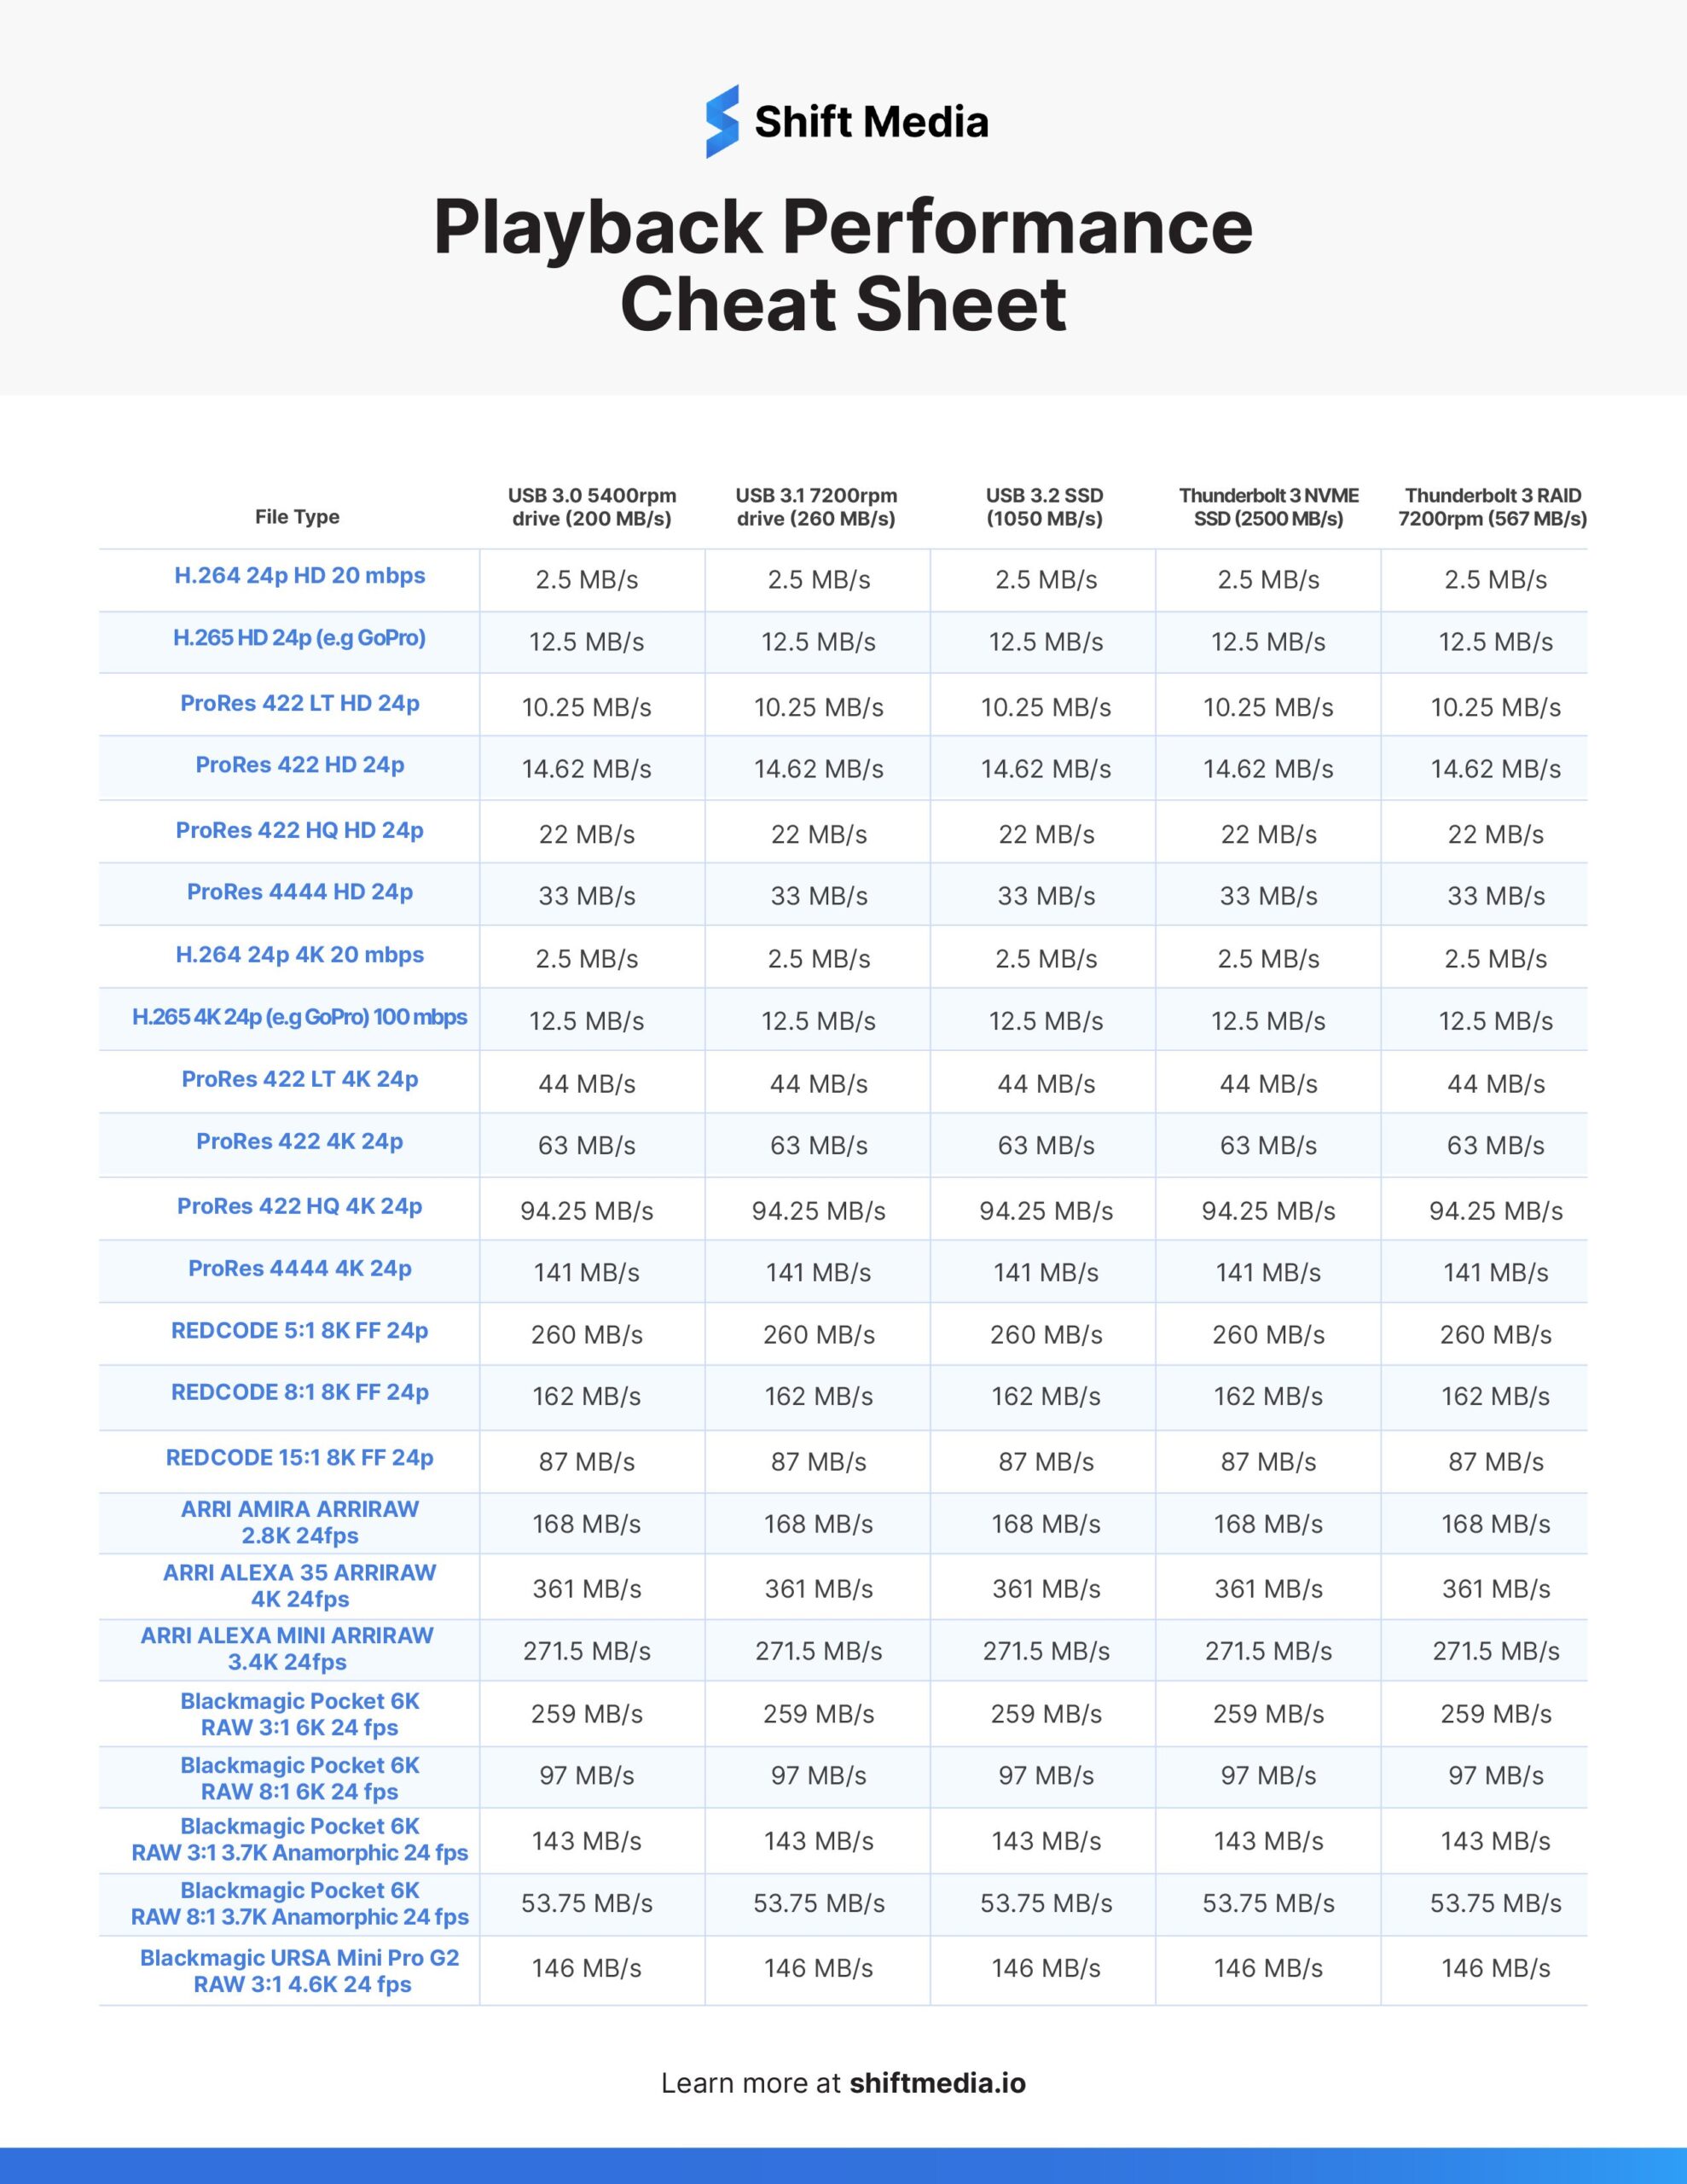 Need for Speed Playback Performance Cheat Sheet